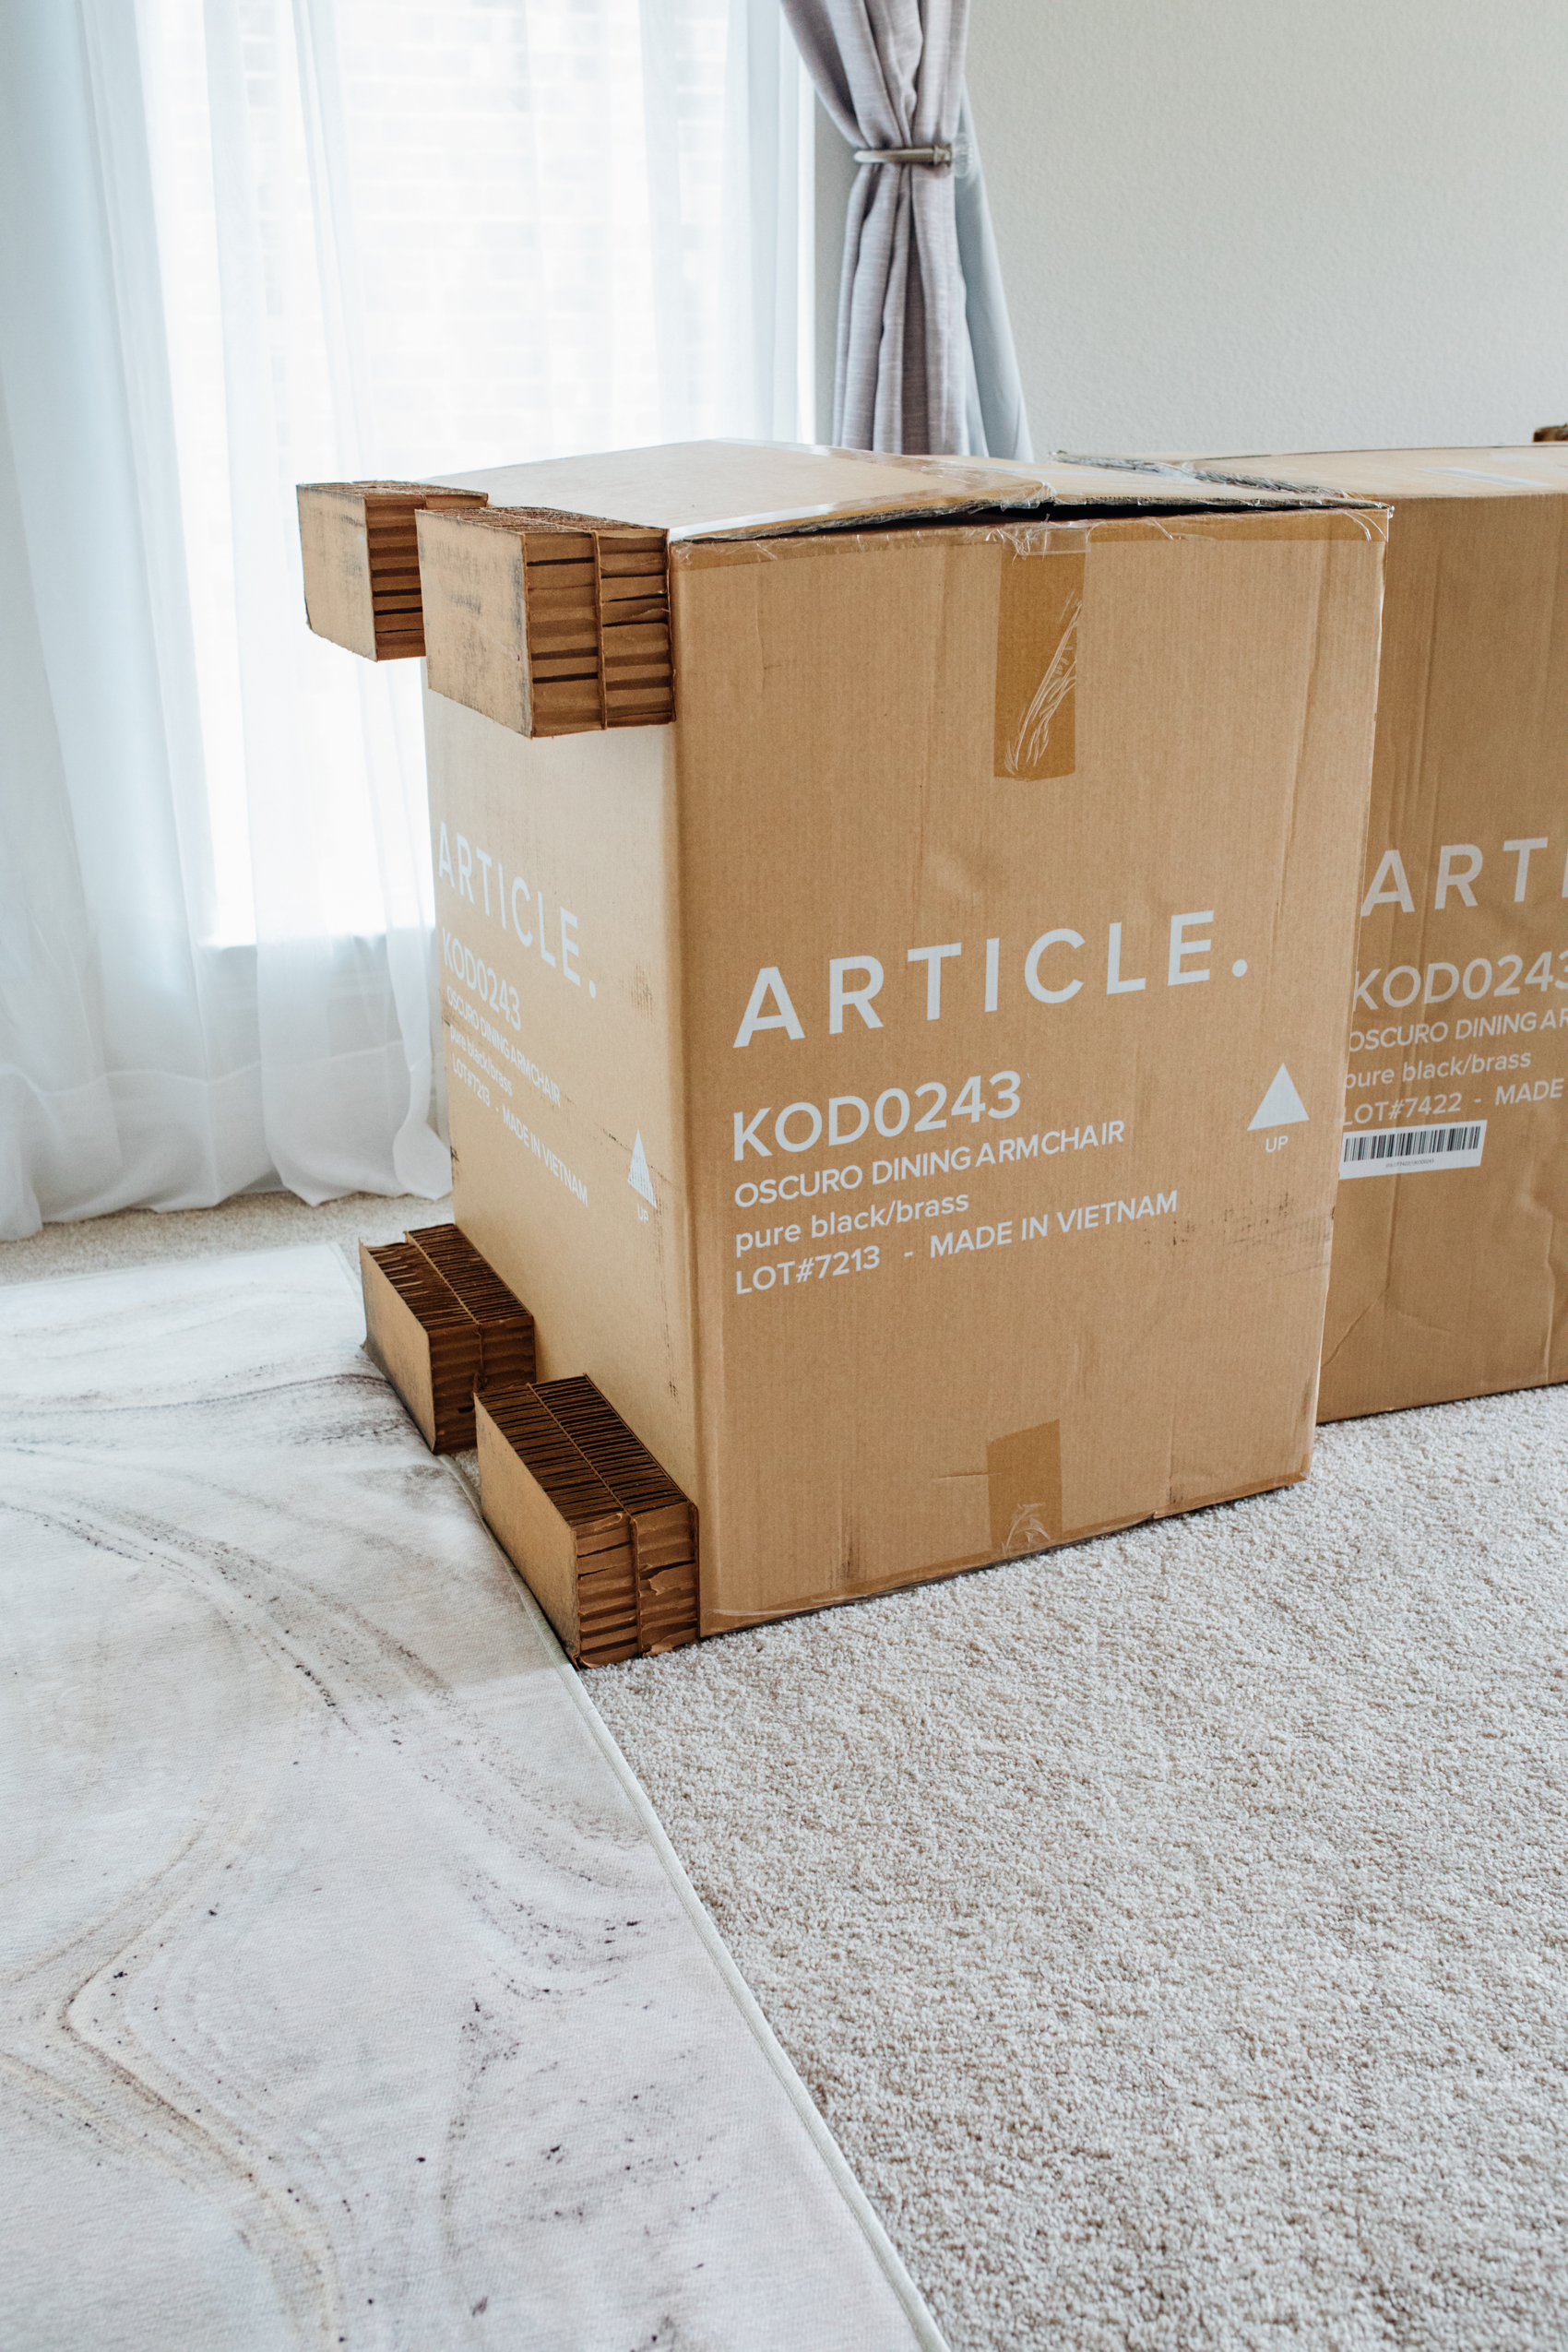 Article delivery process for furniture